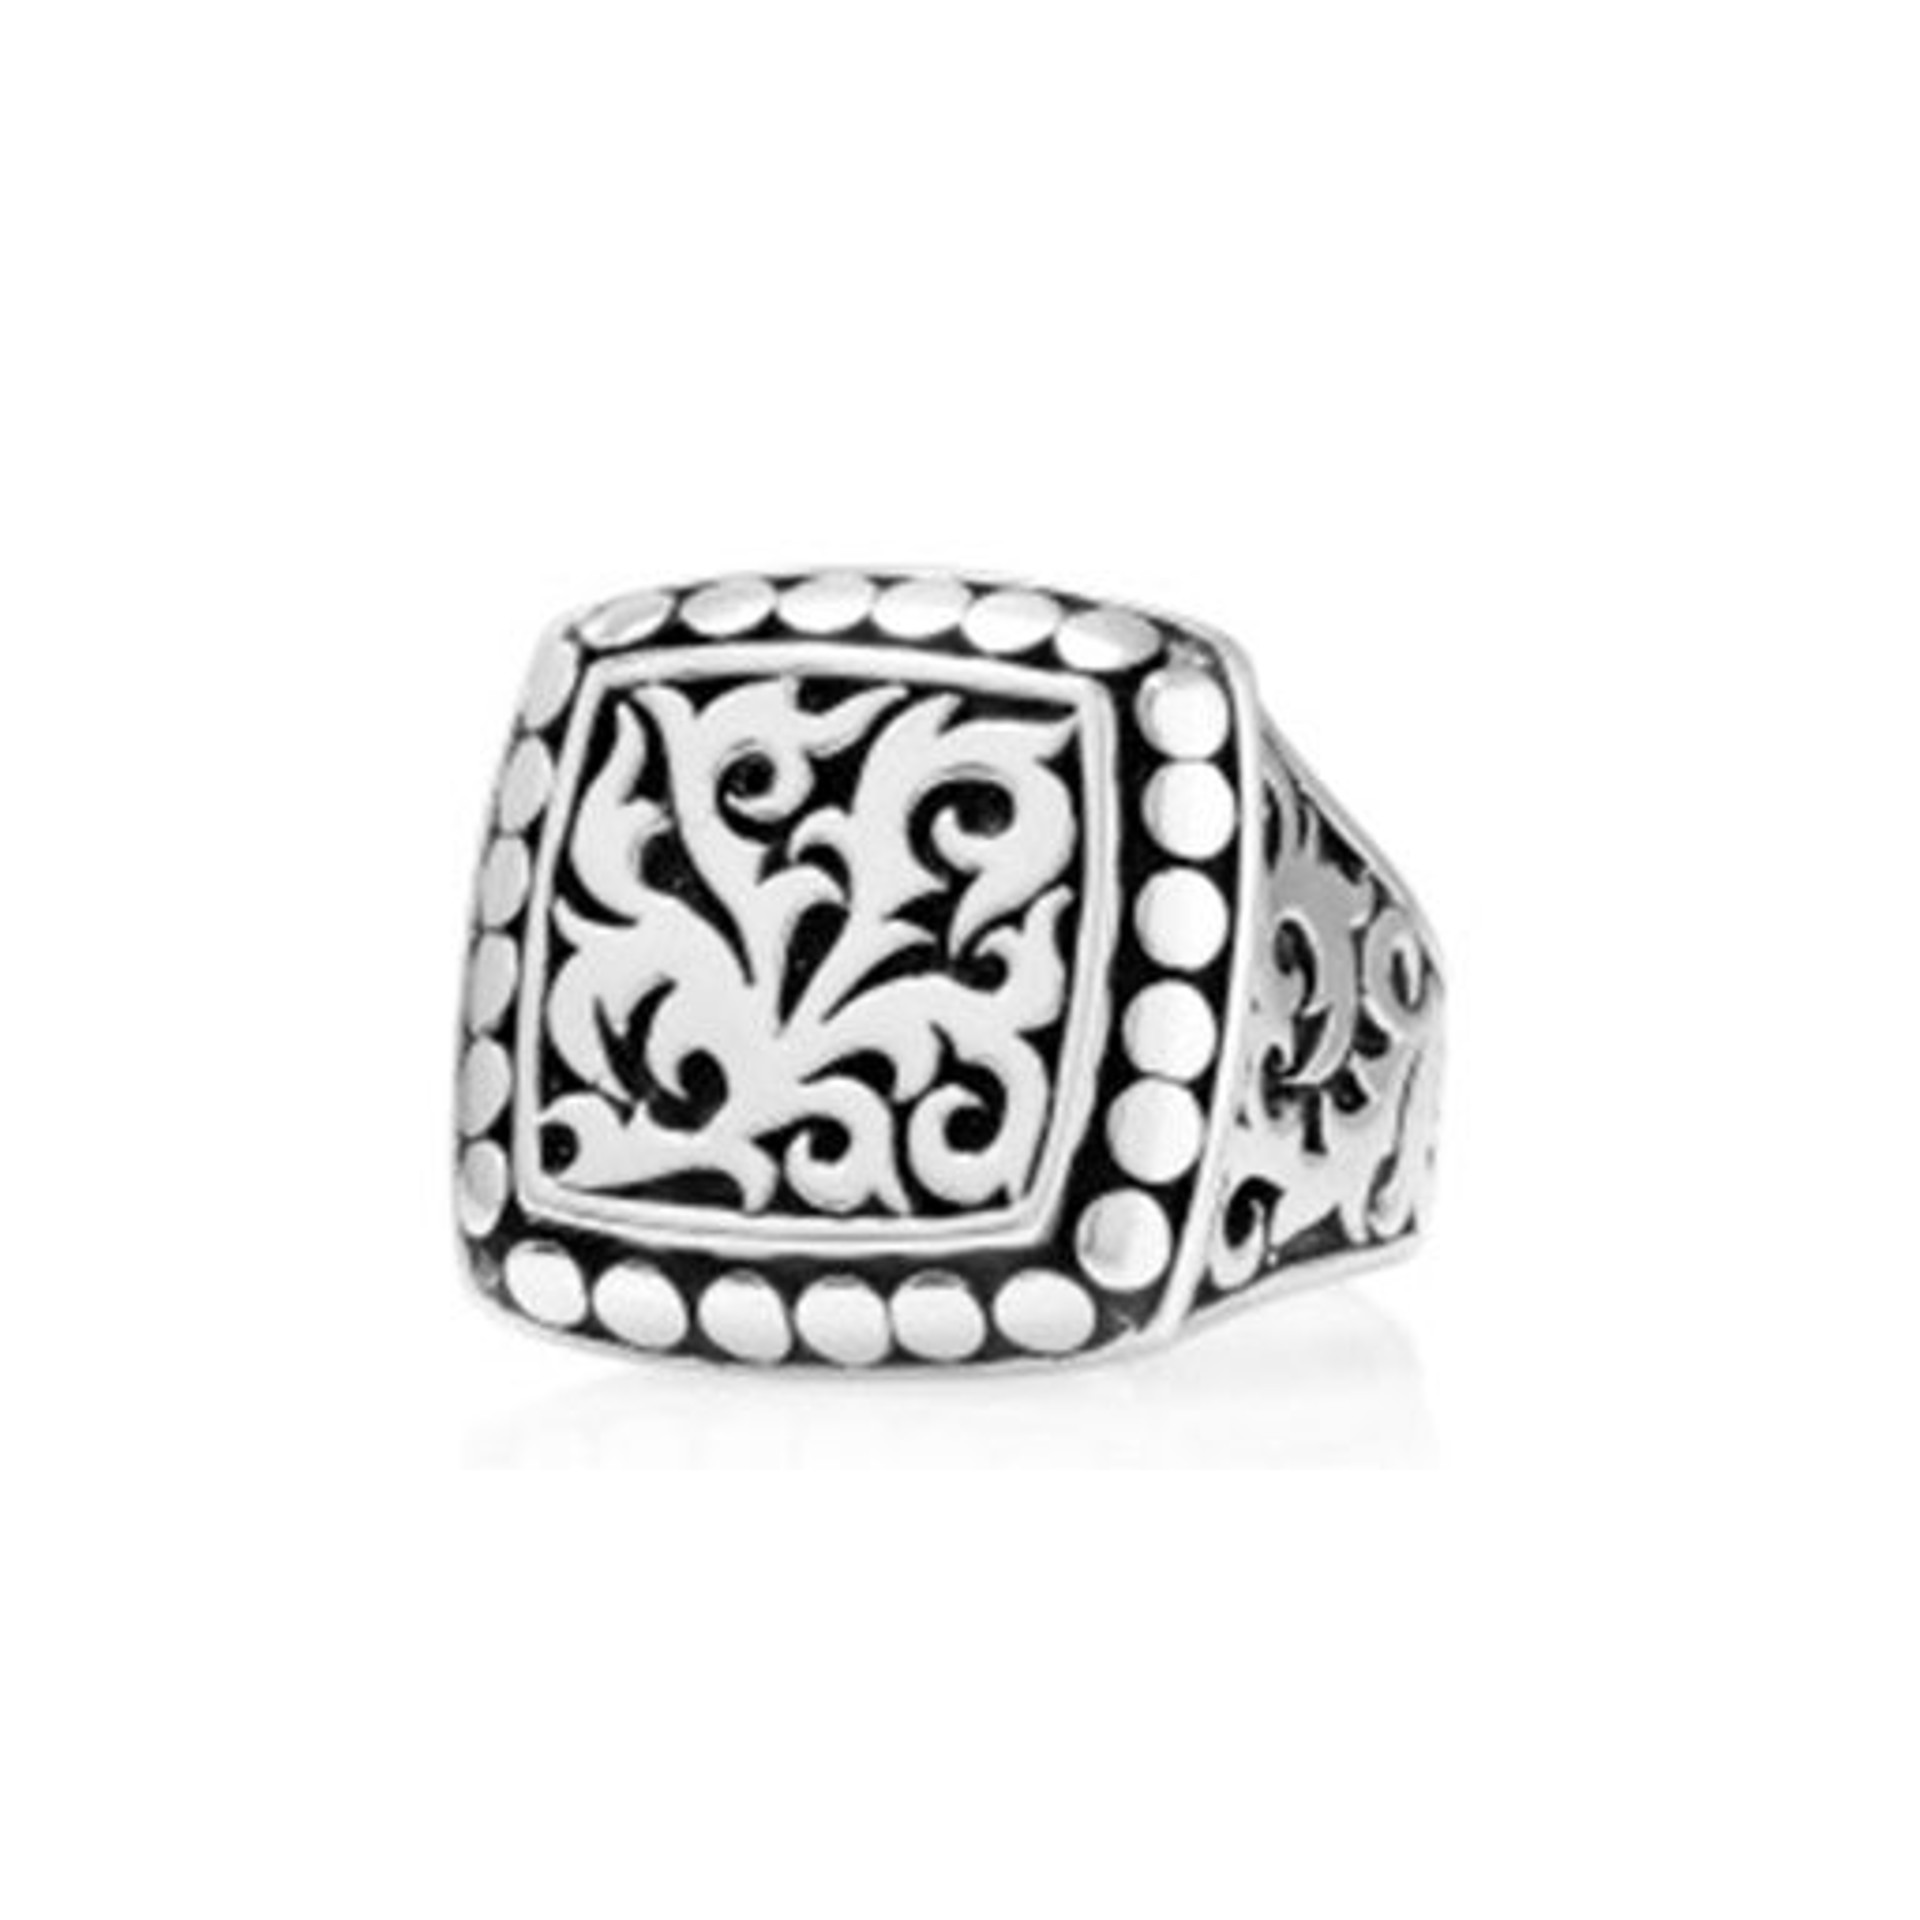 7050 Filigree Square Mens Ring by Lois Hill